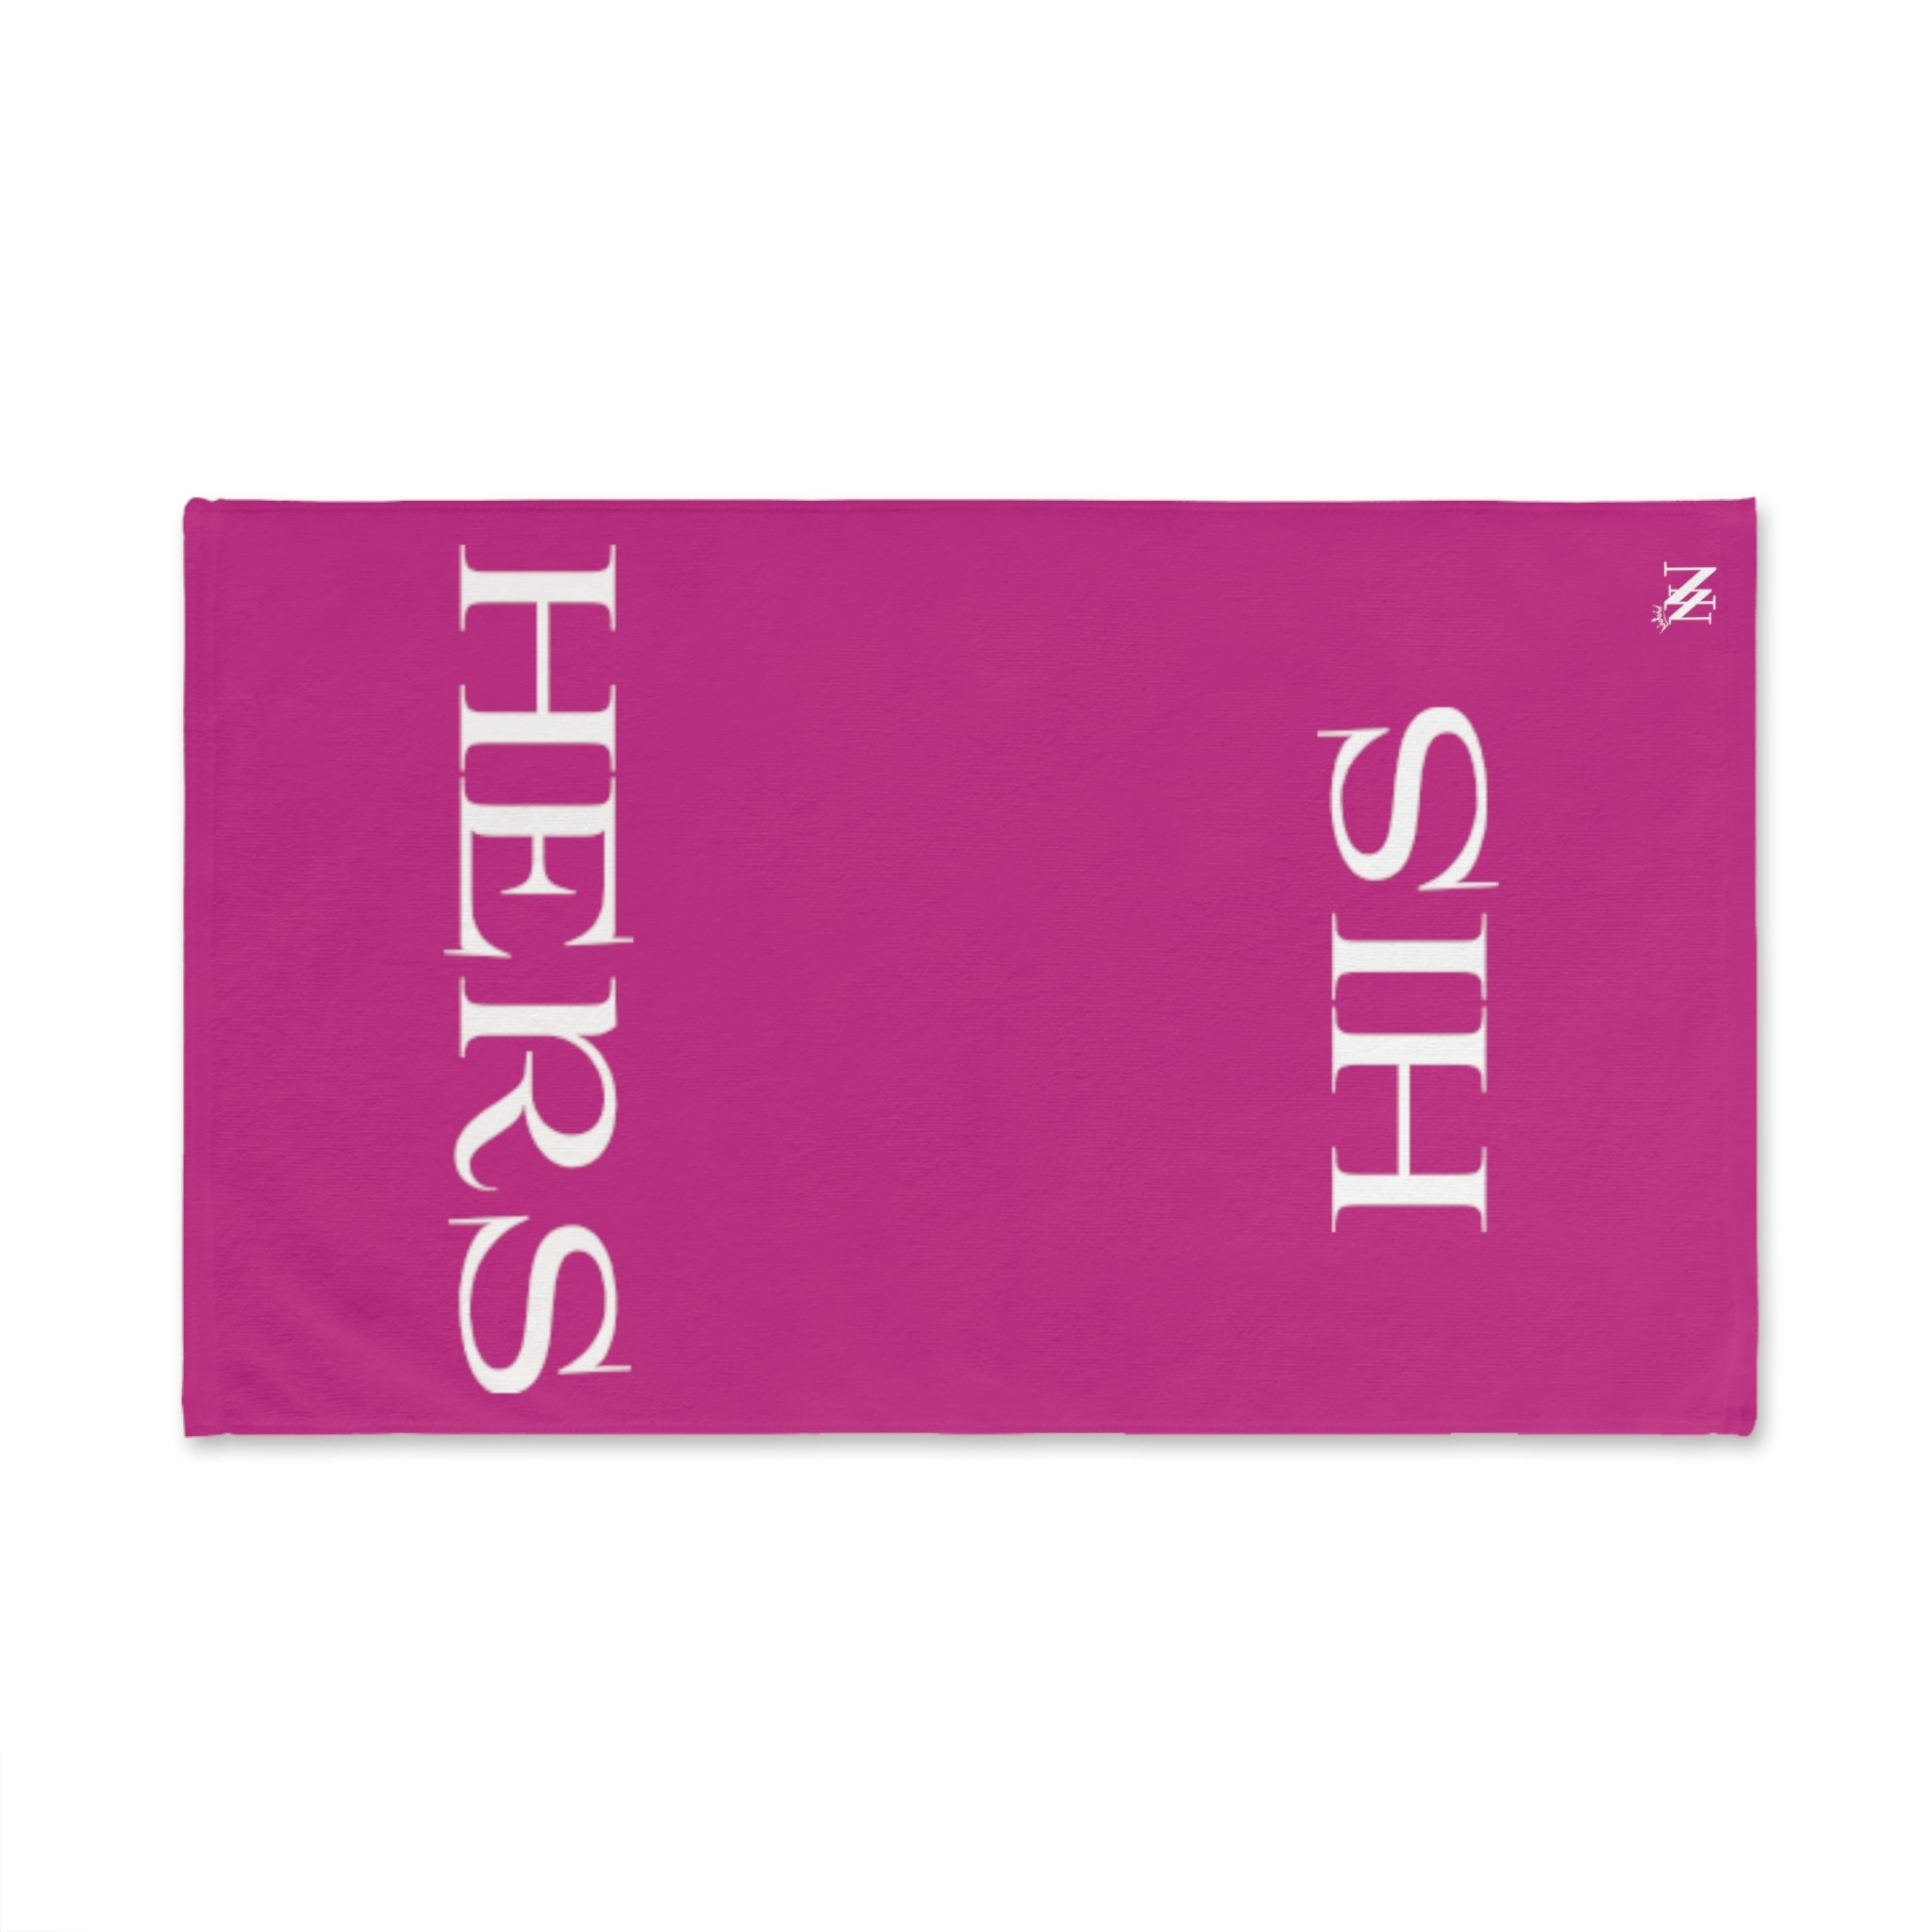 His Hers Fuscia | Funny Gifts for Men - Gifts for Him - Birthday Gifts for Men, Him, Husband, Boyfriend, New Couple Gifts, Fathers & Valentines Day Gifts, Hand Towels NECTAR NAPKINS